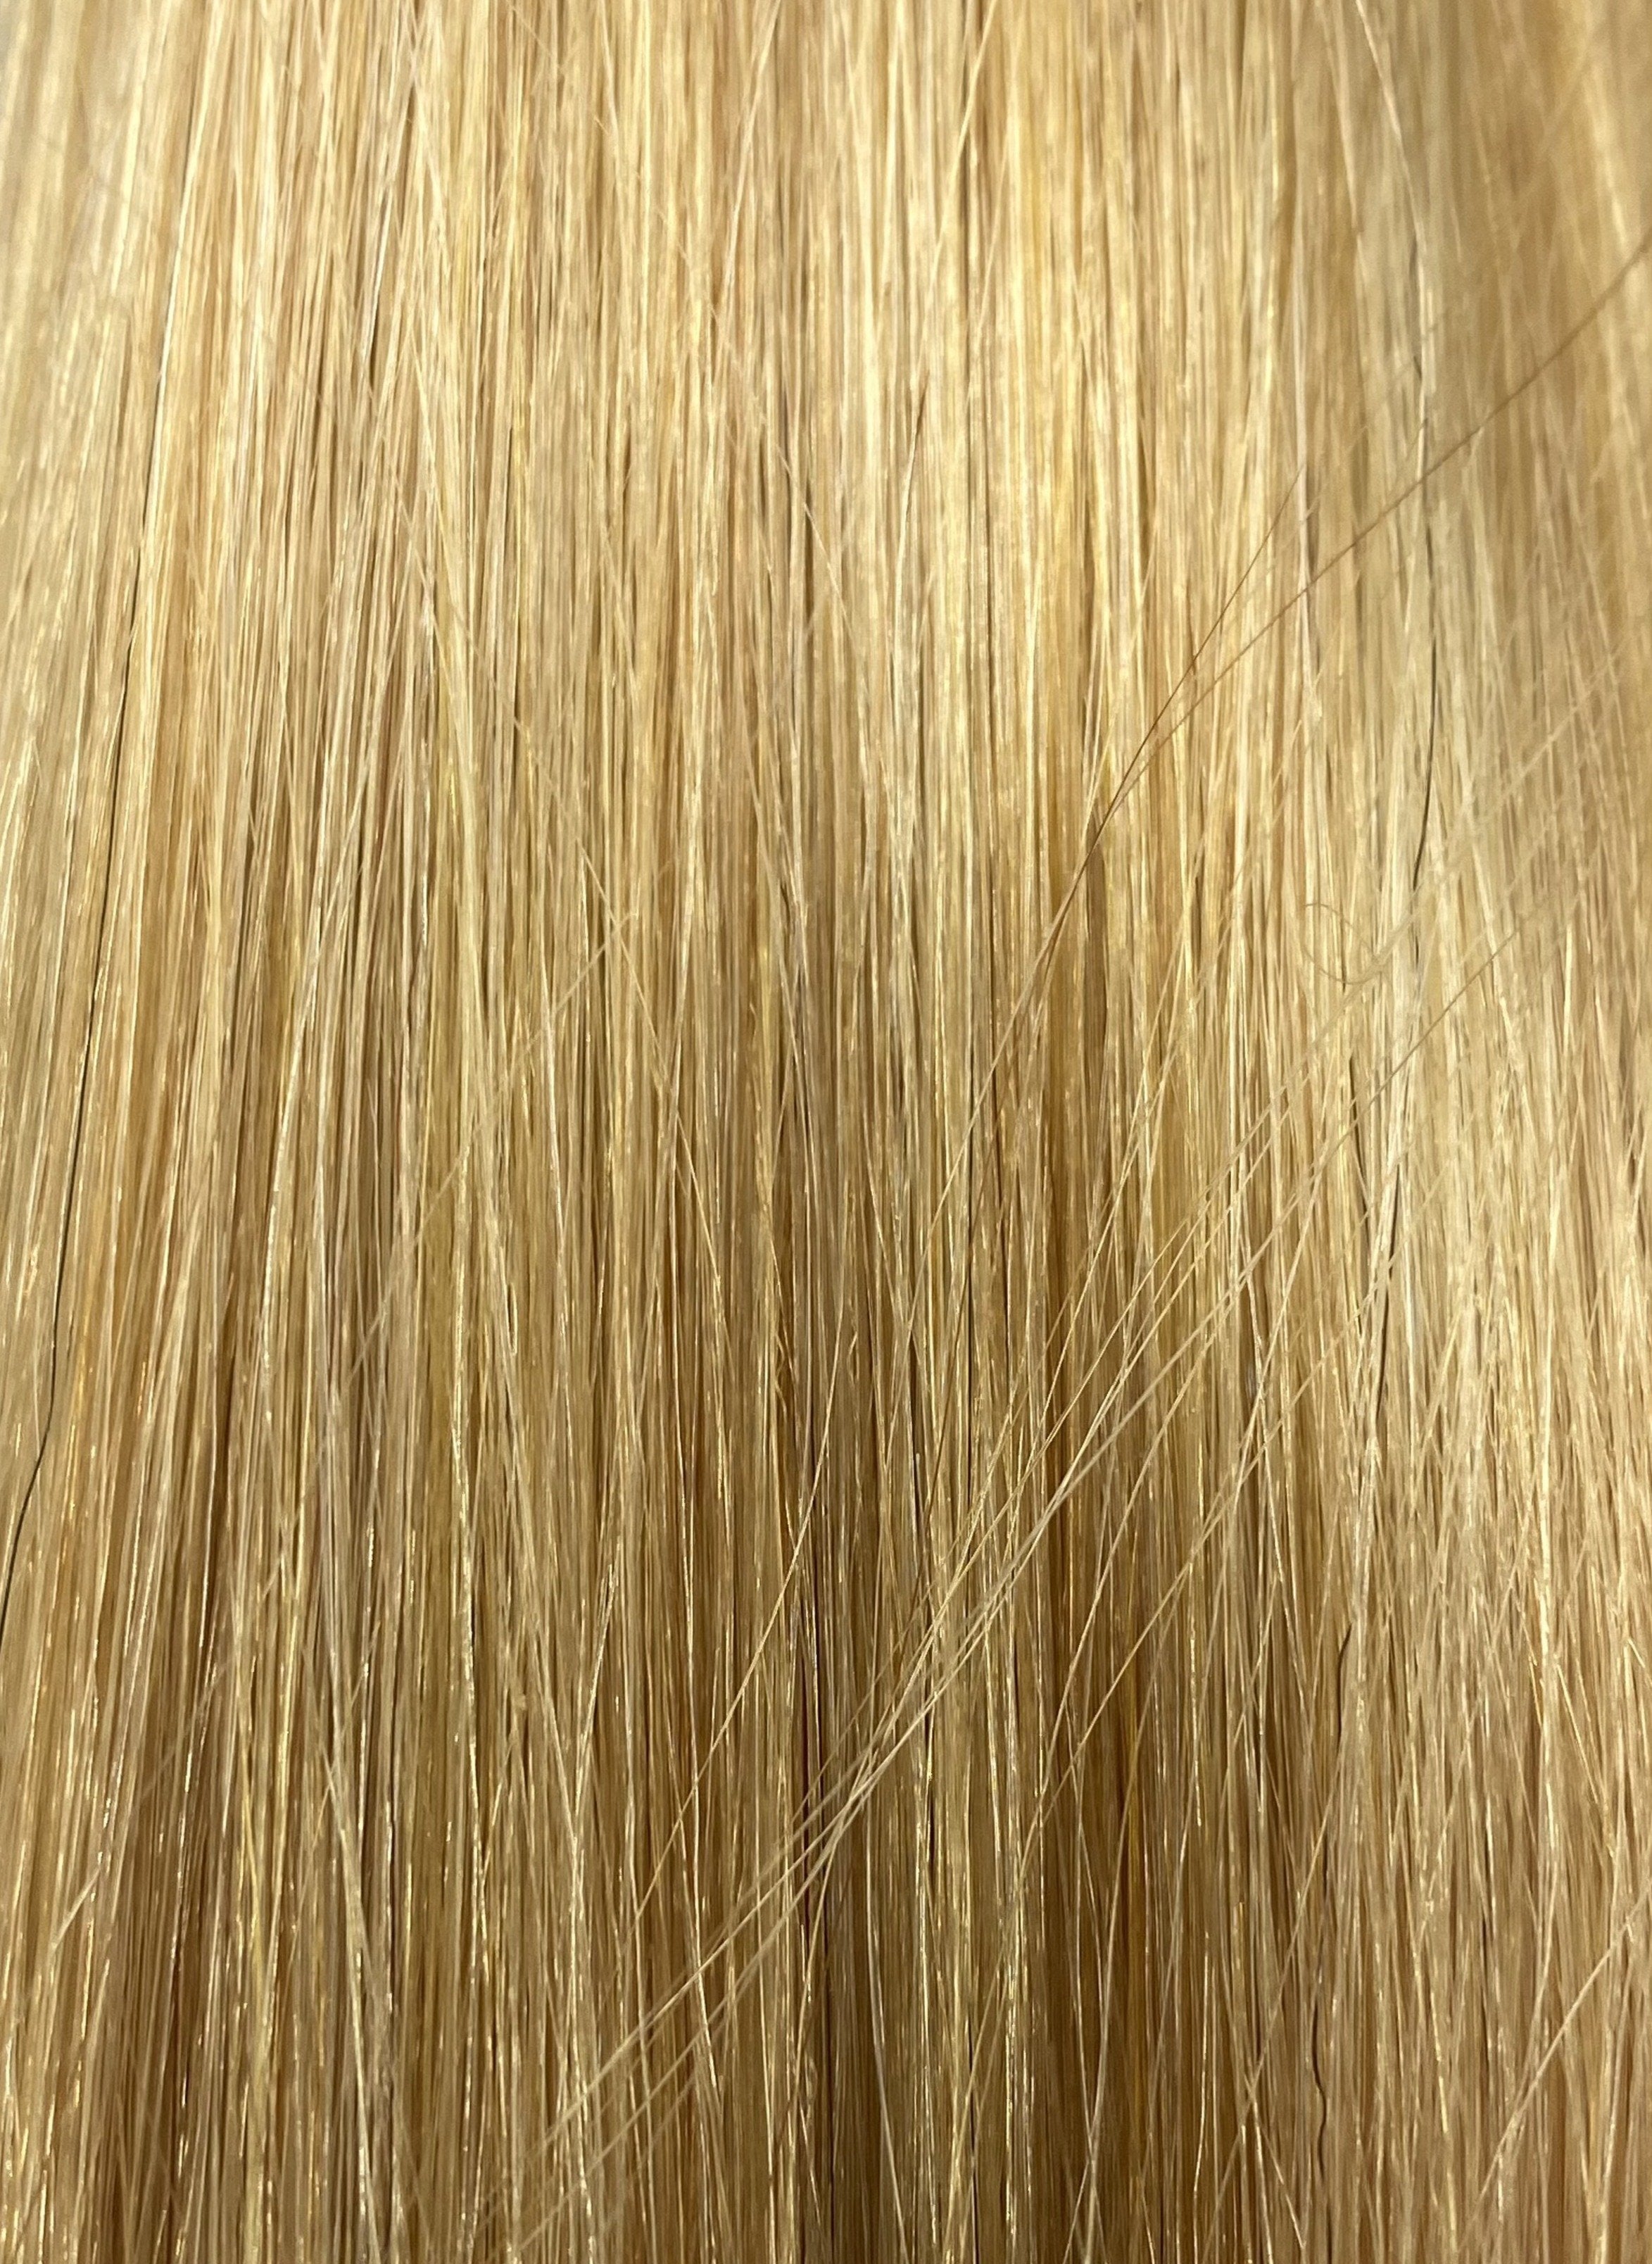 FUSION HIGHLIGHT #140 GOLDEN ULTRA BLONDE 50CM/ 20 INCHES  -  20 GRAMS